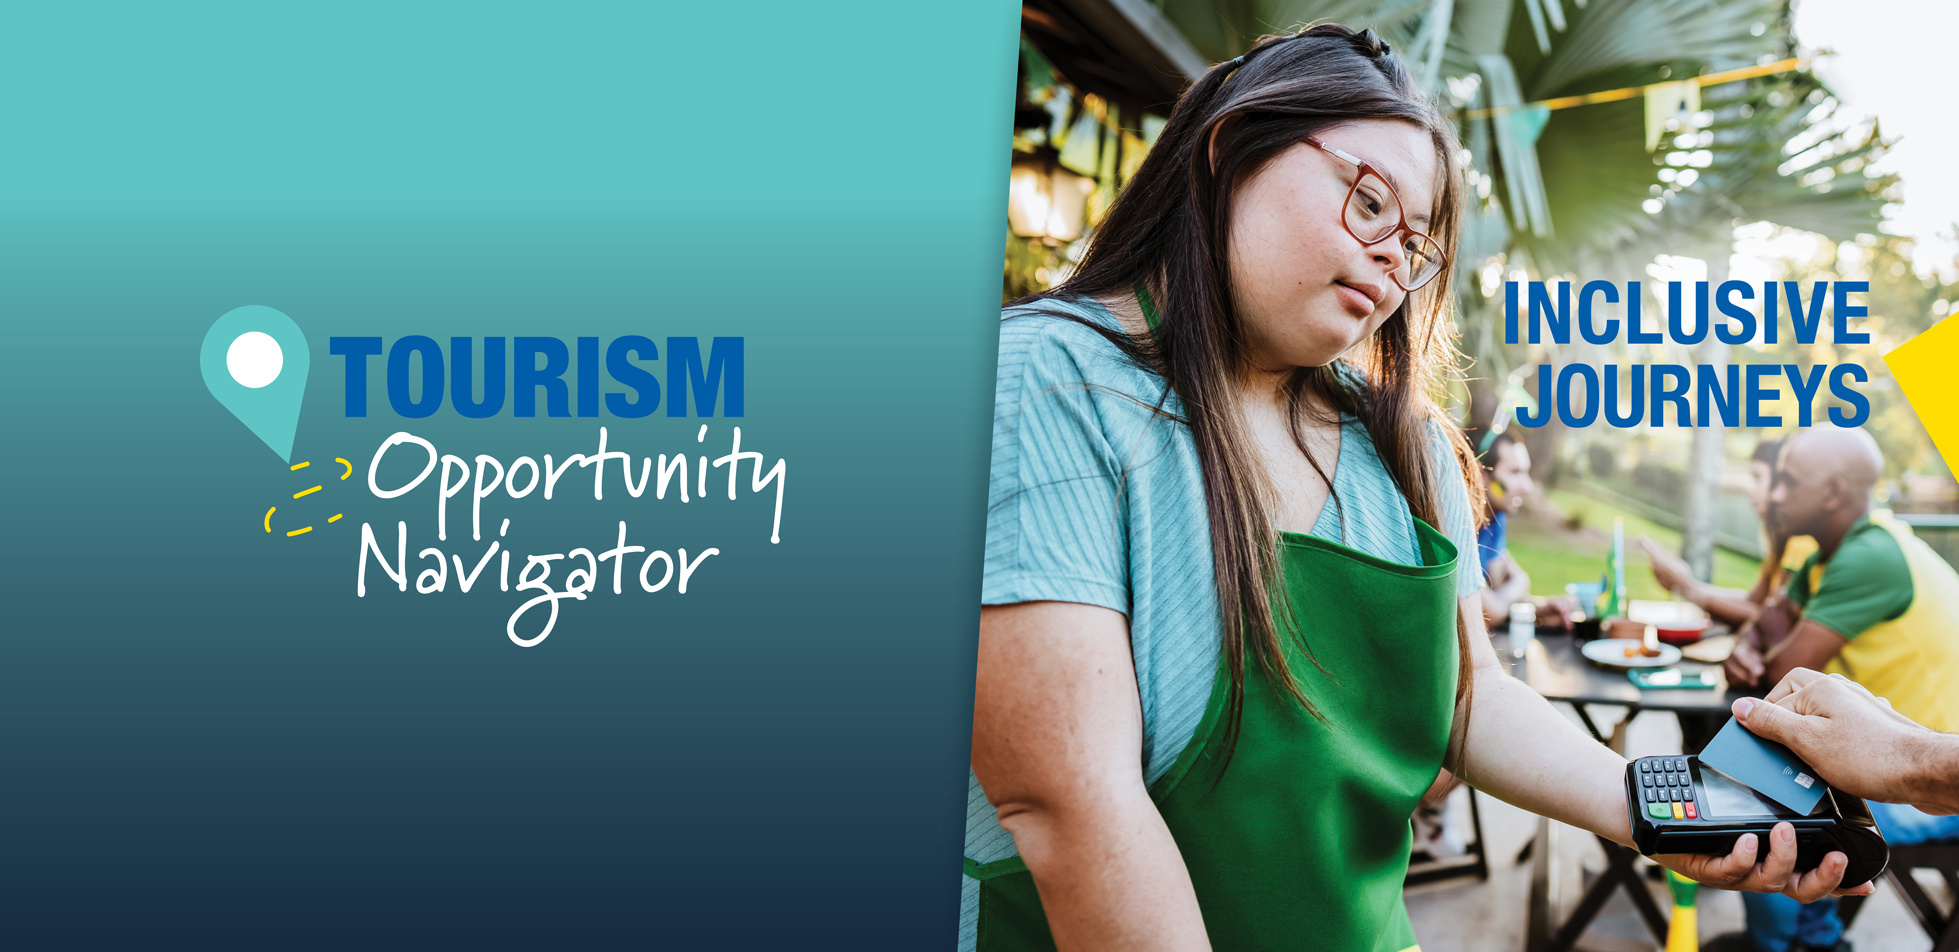 Tourism Opportunity Navigator - disabled employee -header